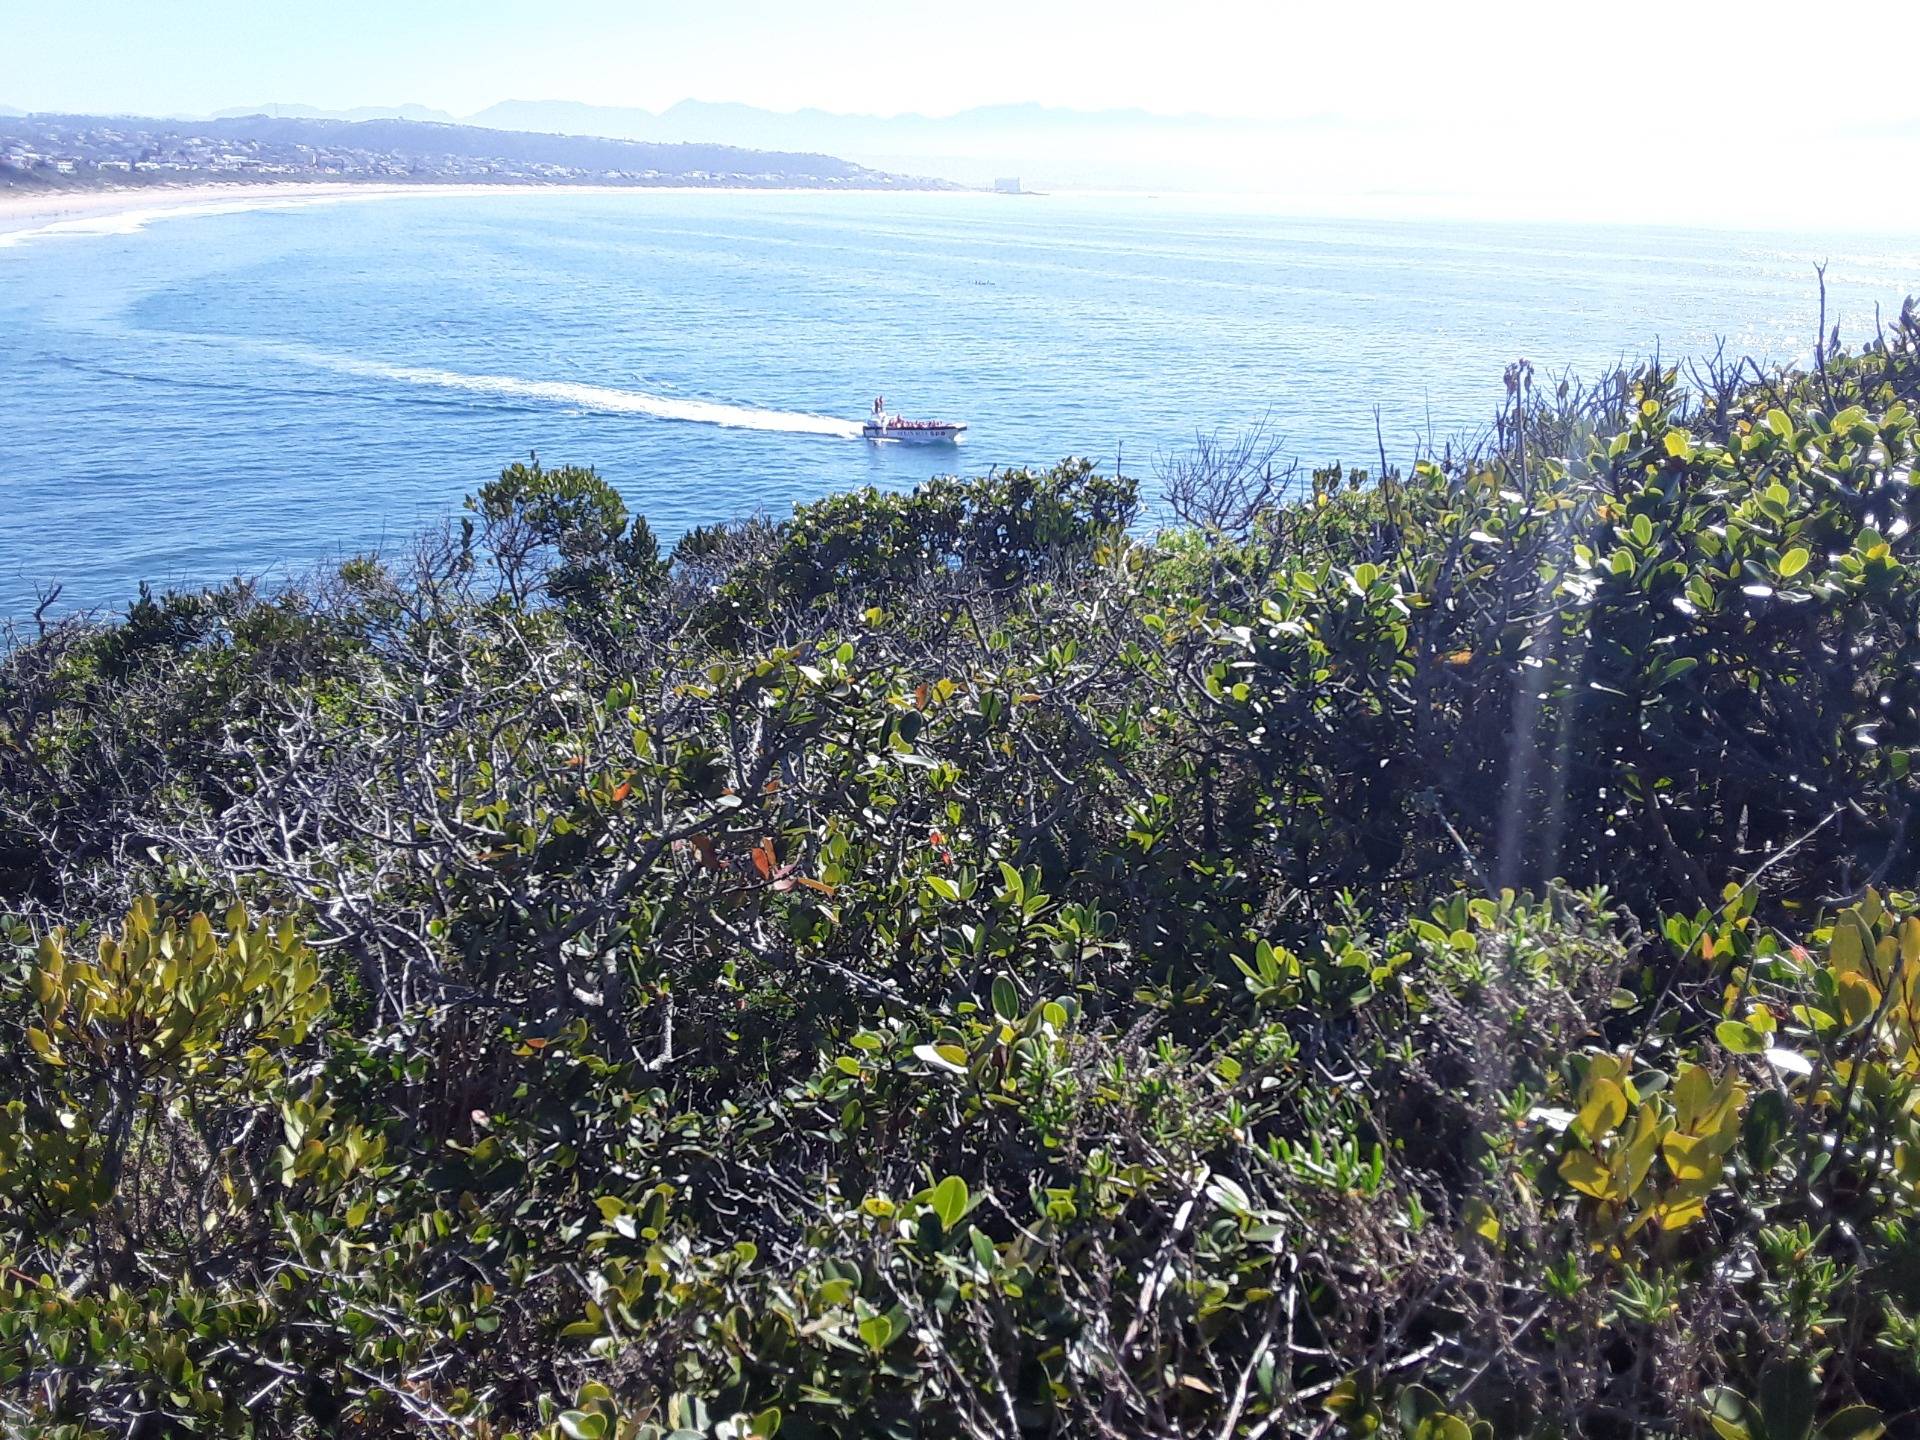 The charter boat arriving near the shores of the peninsula, taken from the cliff side above.